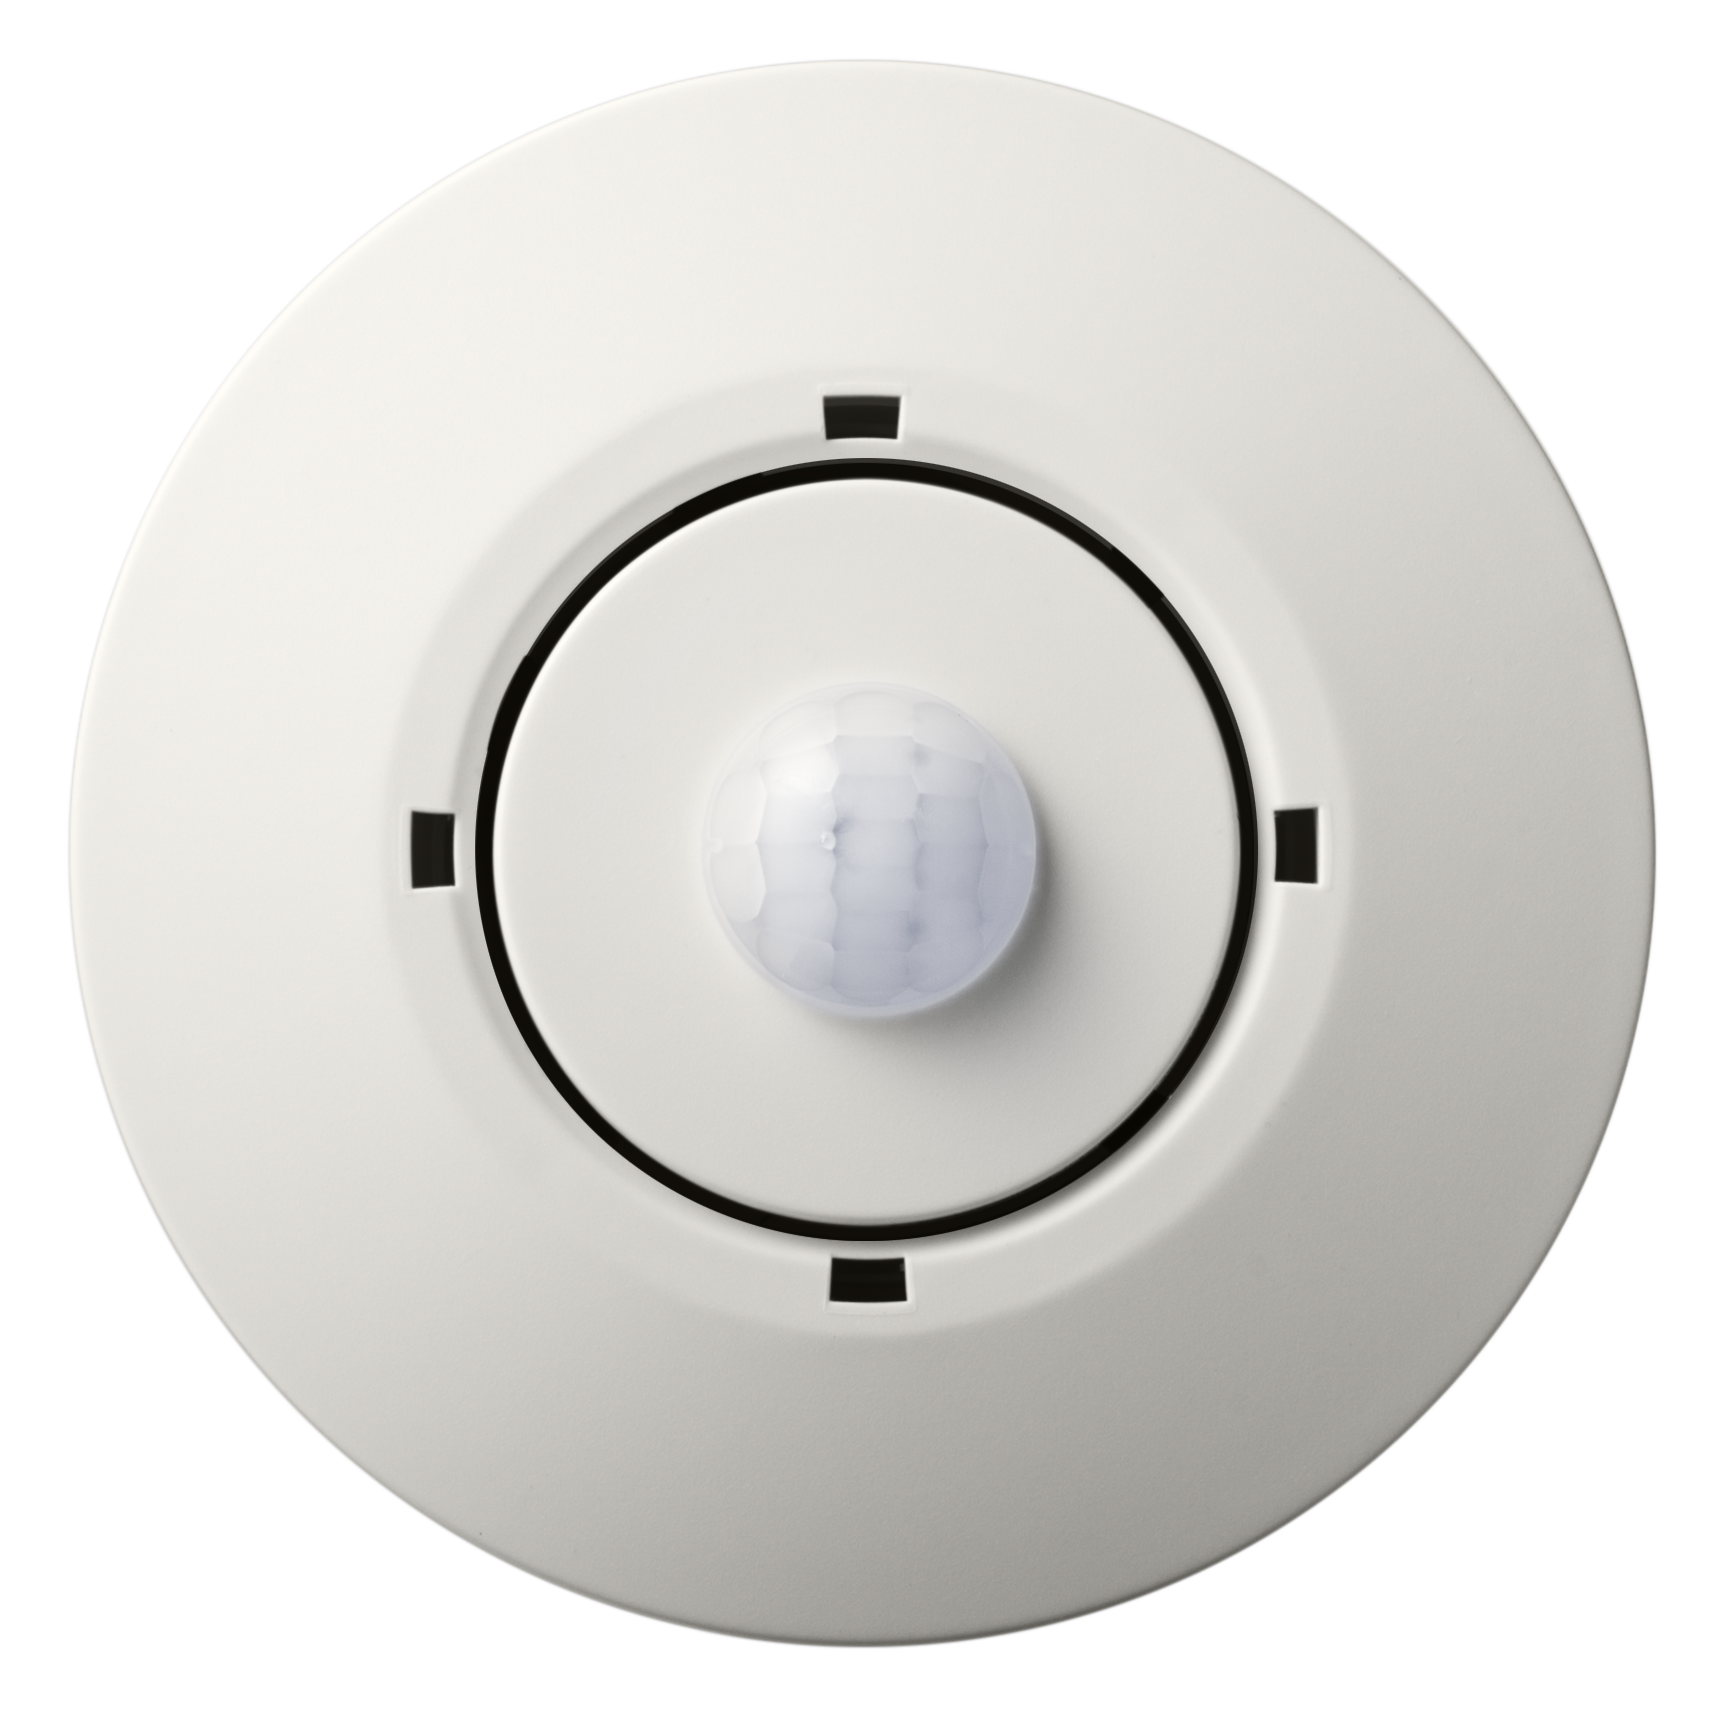 Lunatone DALI-2 motion sensor 12m, constant light control, Application Controller and Instance Mode, RAL9010, standard mounting holes